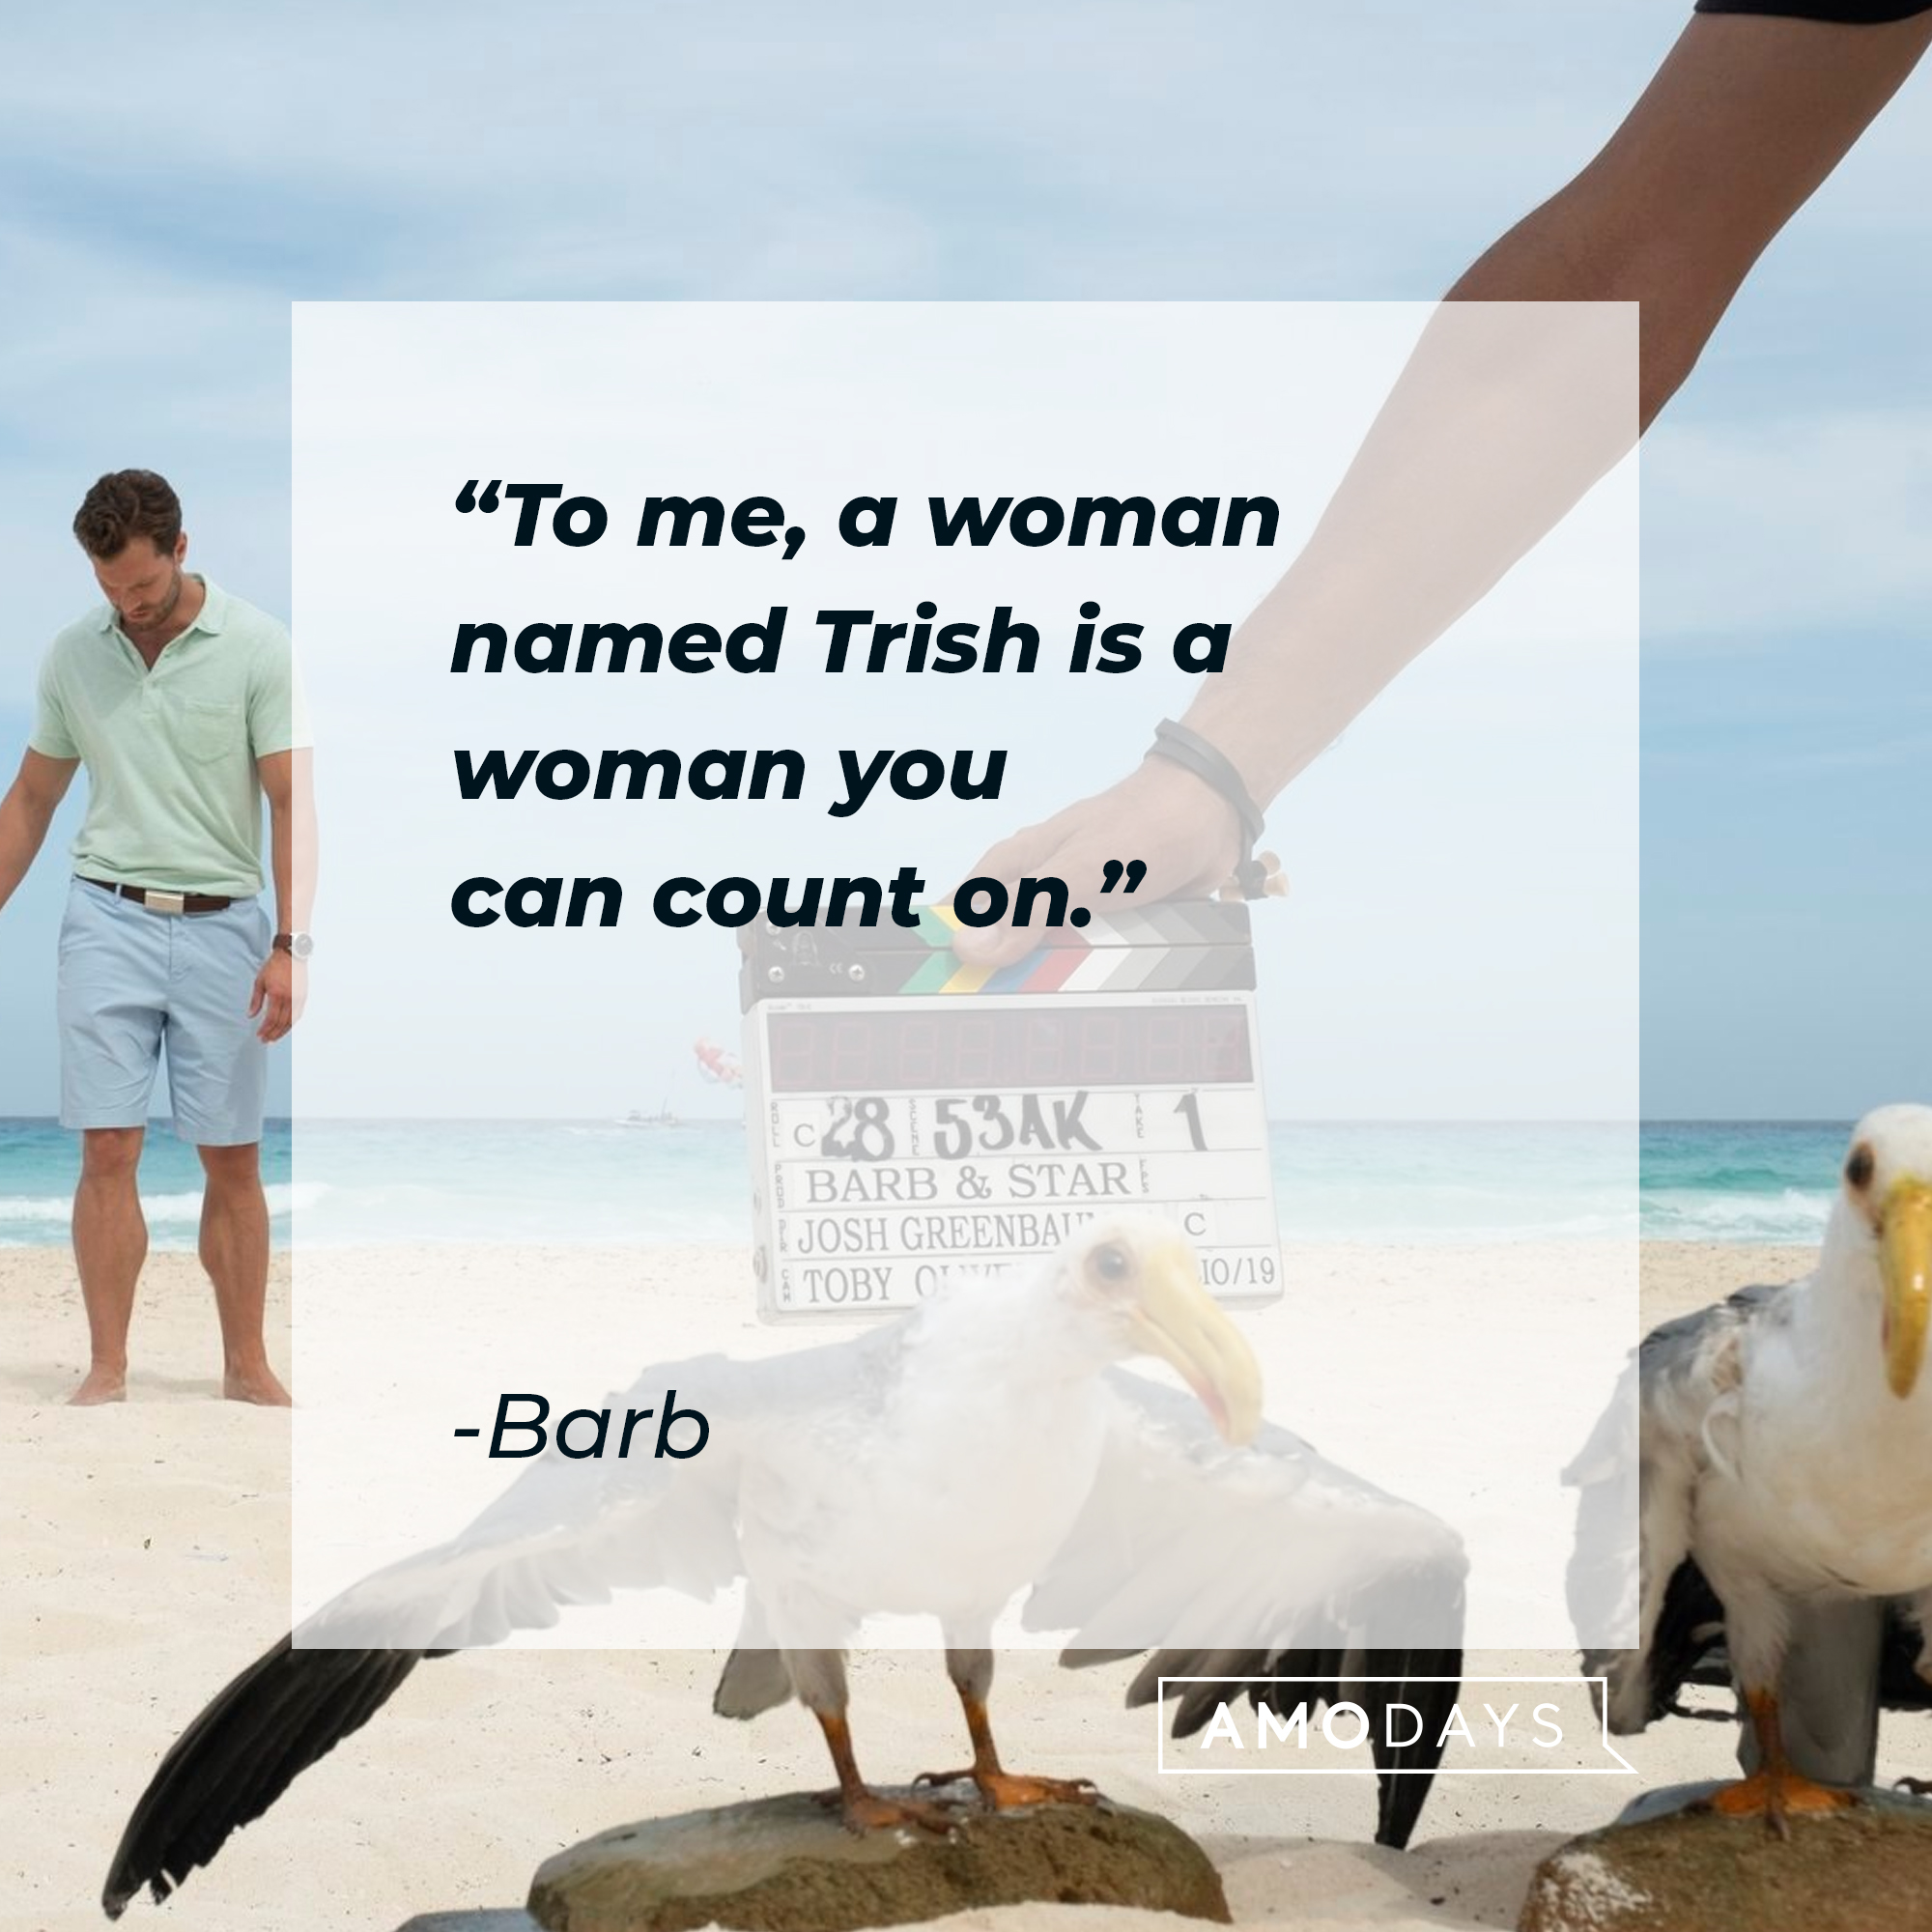 Barb's quote: "To me, a woman named Trish is a woman you can count on." | Source: facebook.com/BarbAndStar